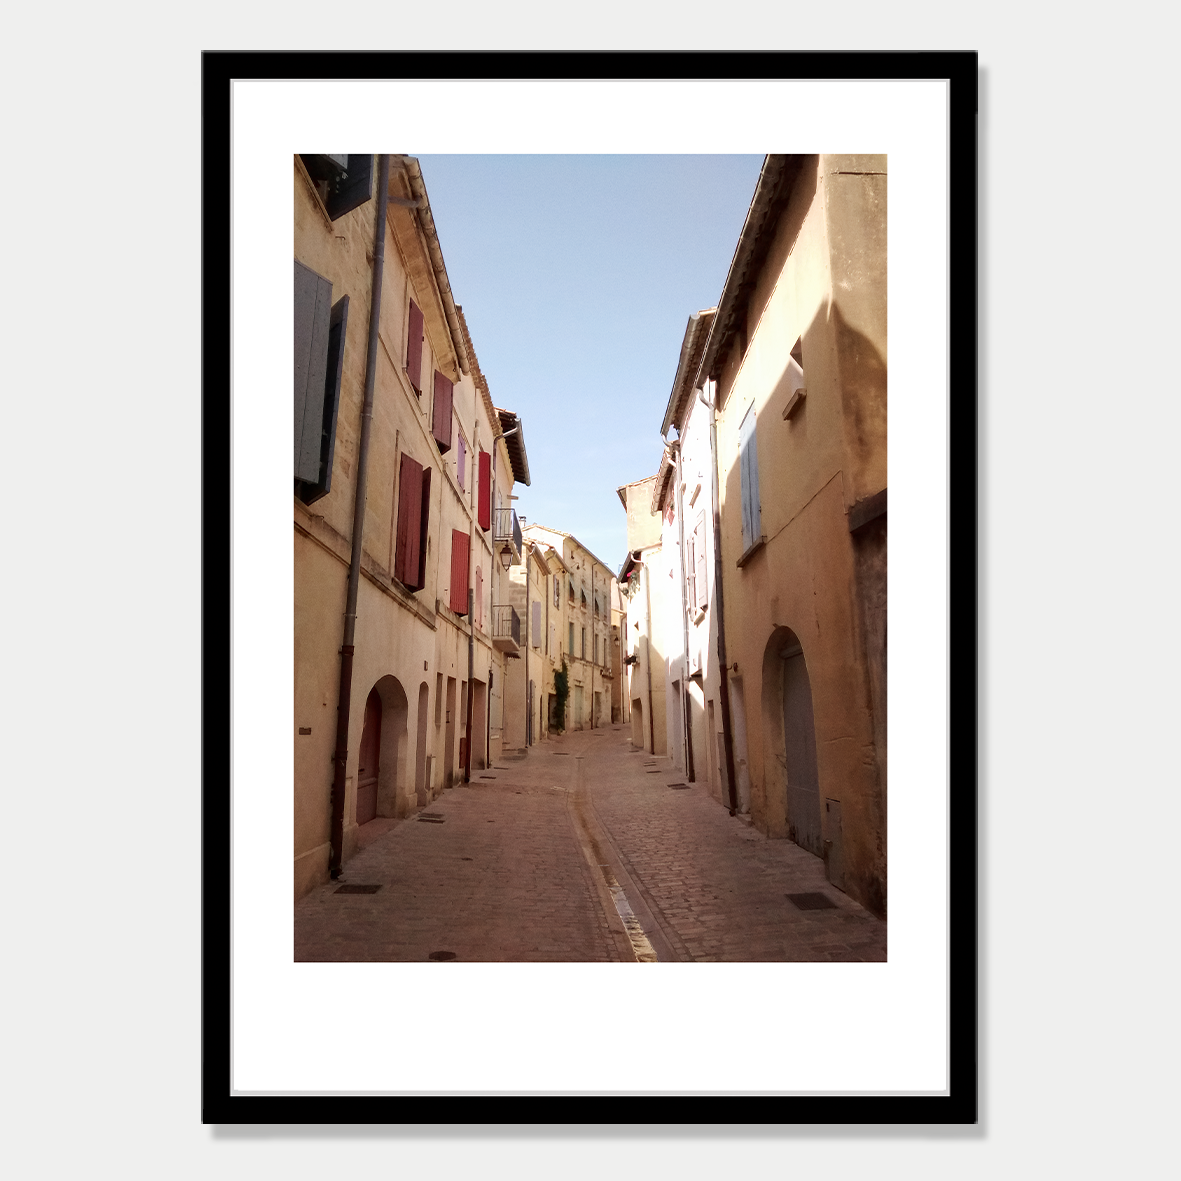 Looking down an Empty Street in Uzes, a small town in France Photographic Art Print in a Skinny Black Frame